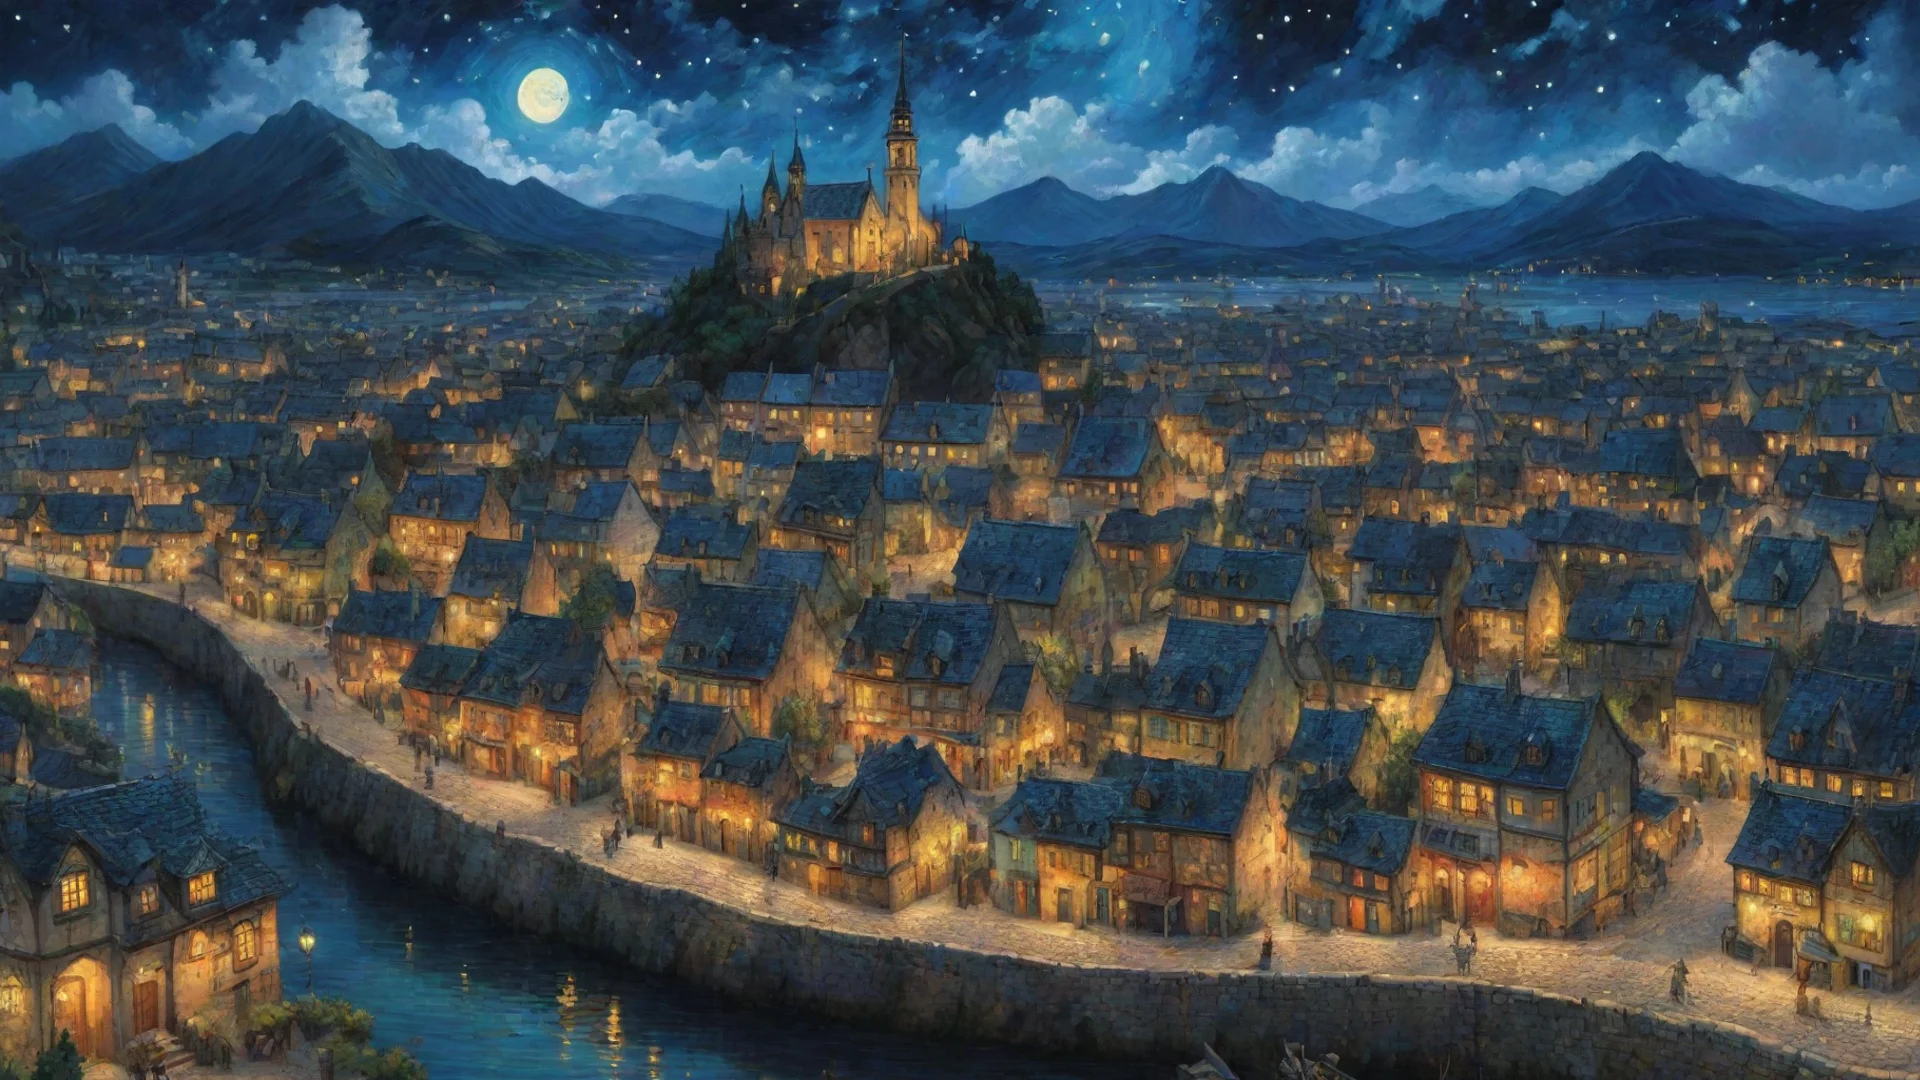 artstation art epic town lit up at night sky epic lovely artistic ghibli van gogh happyness bliss peace  detailed asthetic hd wow confident engaging wow 3 wide